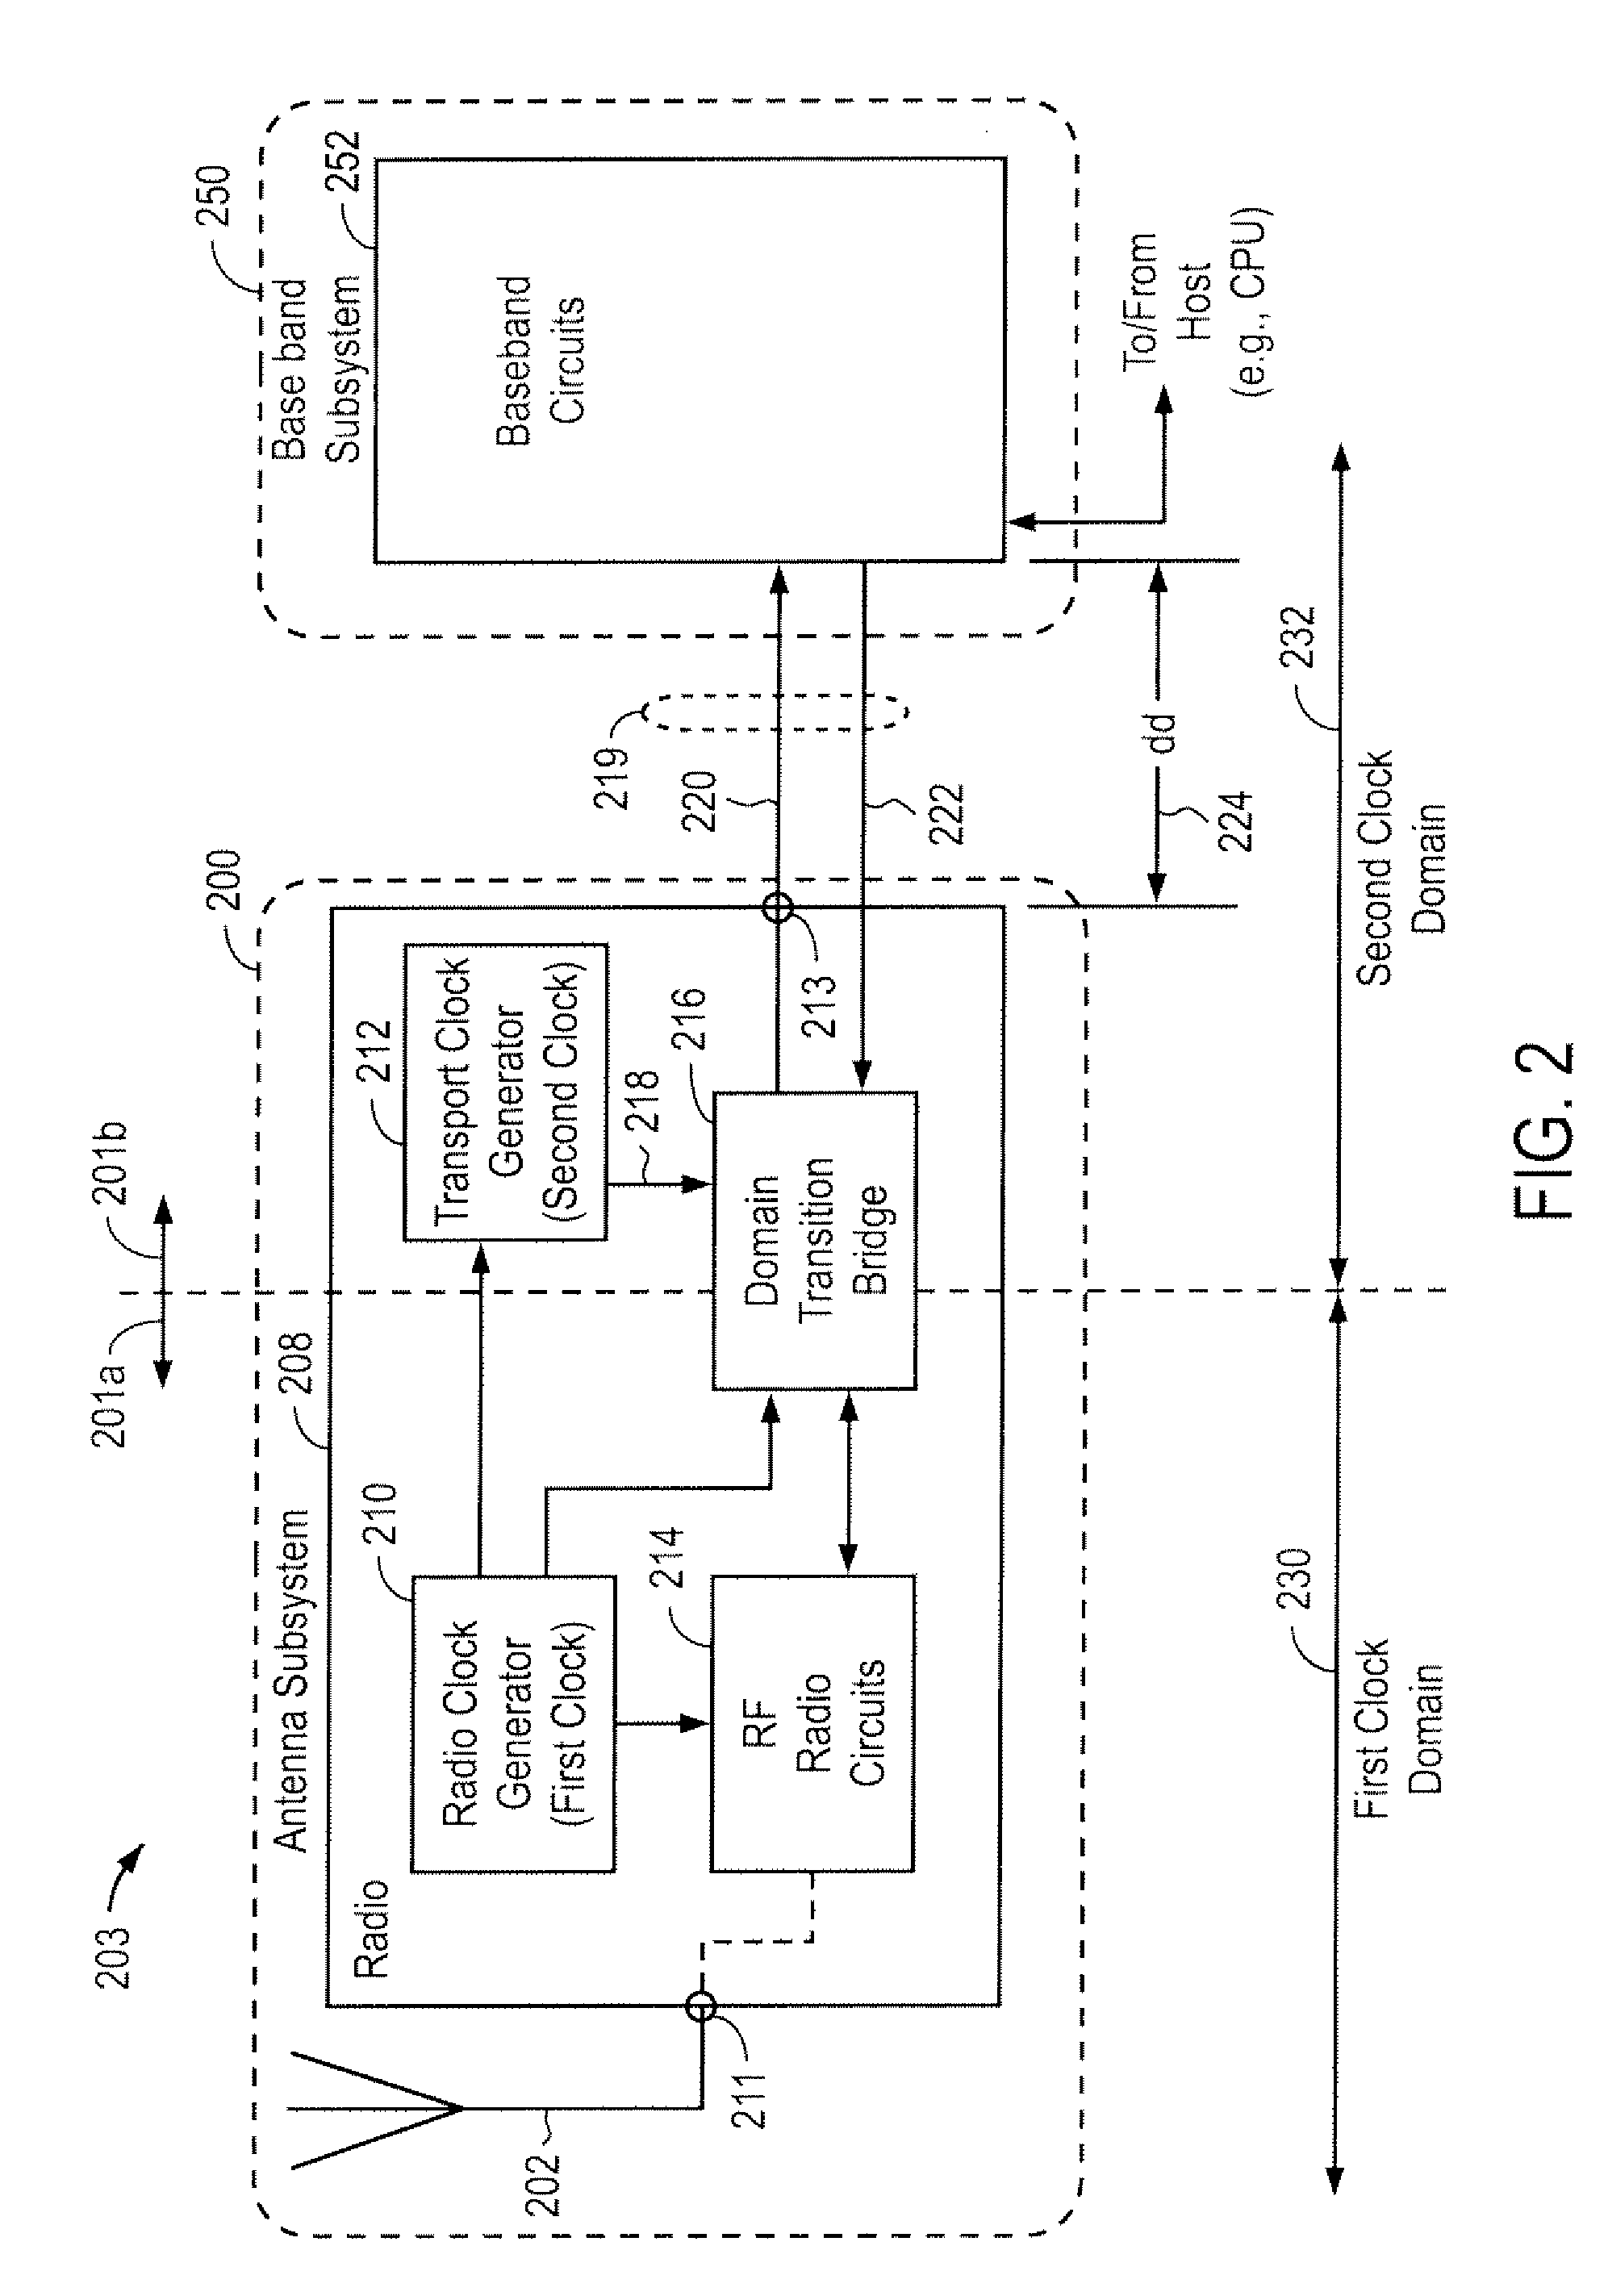 Radio frequency antenna system and high-speed digital data link to reduce electromagnetic interference for wireless communications